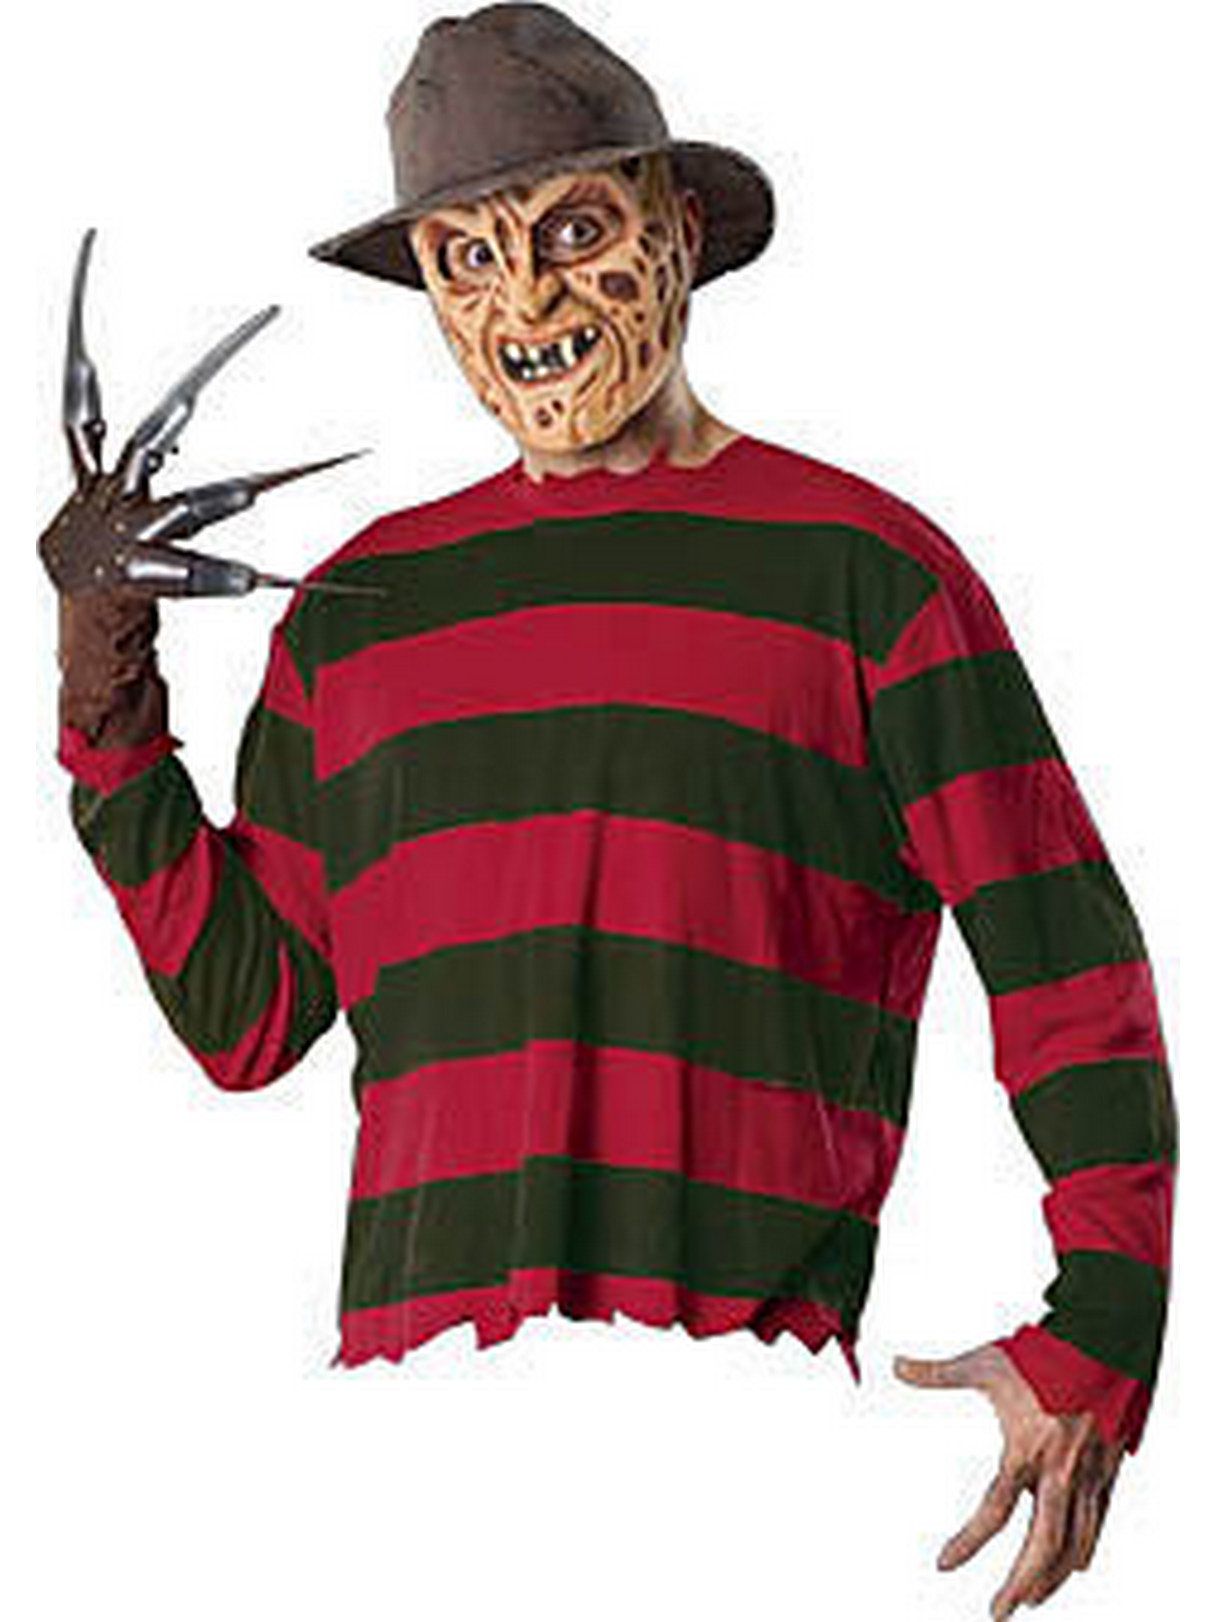 Adult A Nightmare on Elm Street Freddy Krueger Shirt, Hat, Mask and Glove - costumes.com